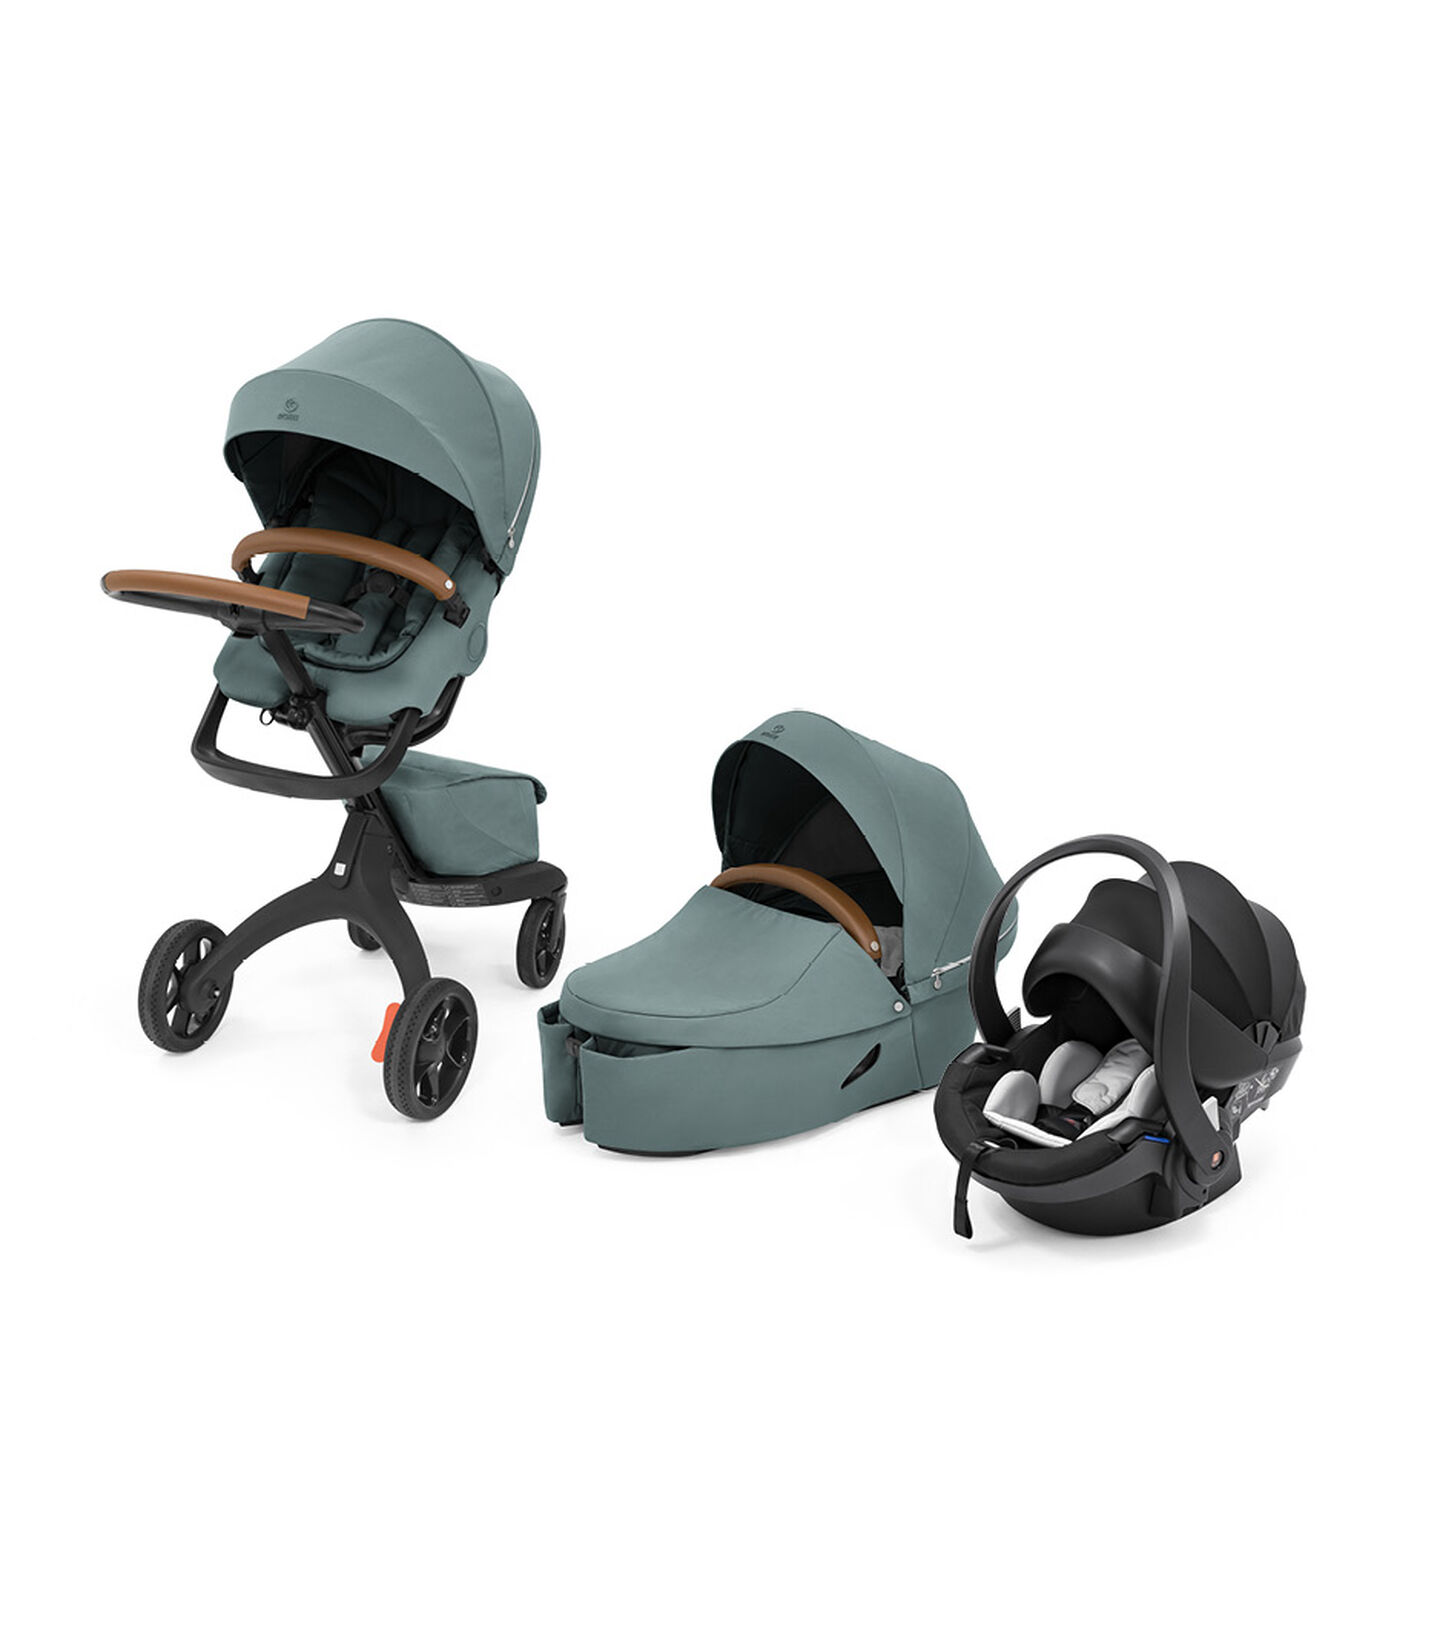 Stokke® Xplory® X Cool Teal, Cool Teal, mainview view 6